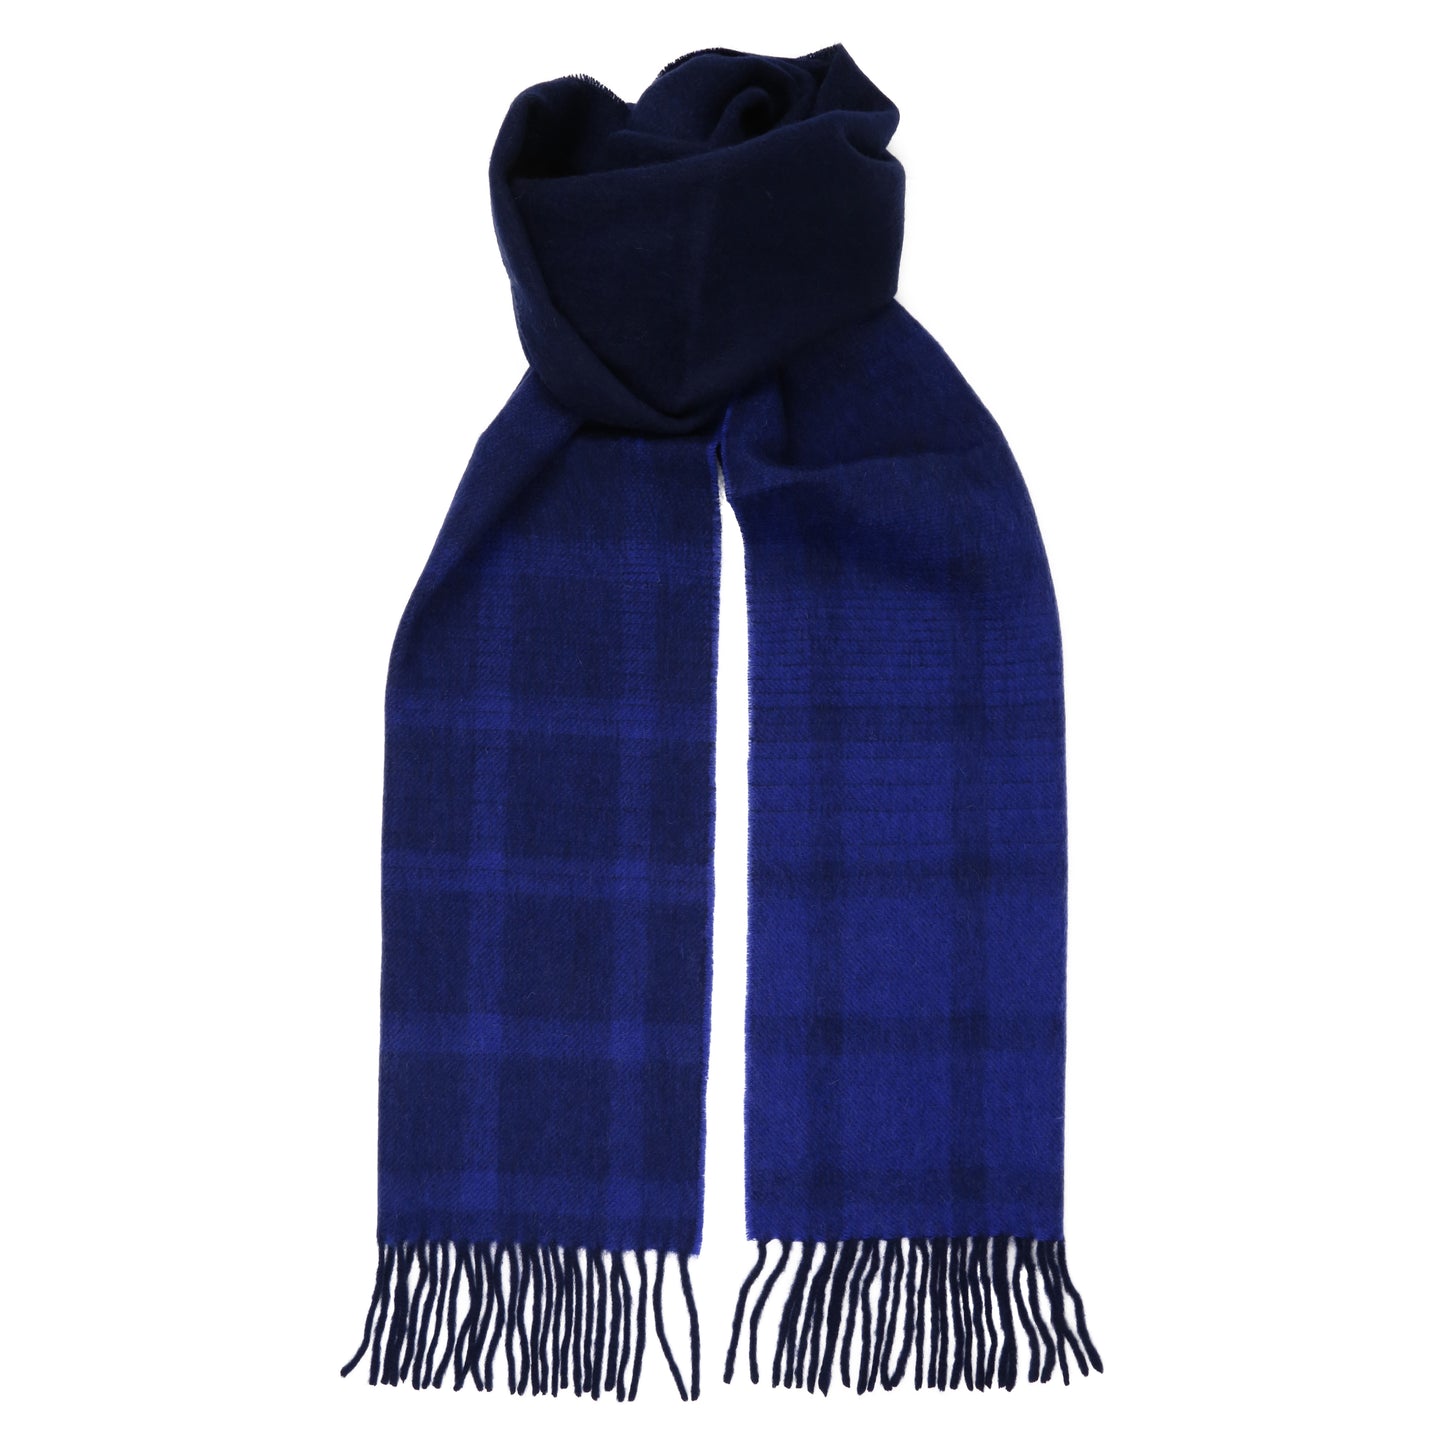 Ultramarine Eclipse Blue Checked 100% Lambswool Long Scarf